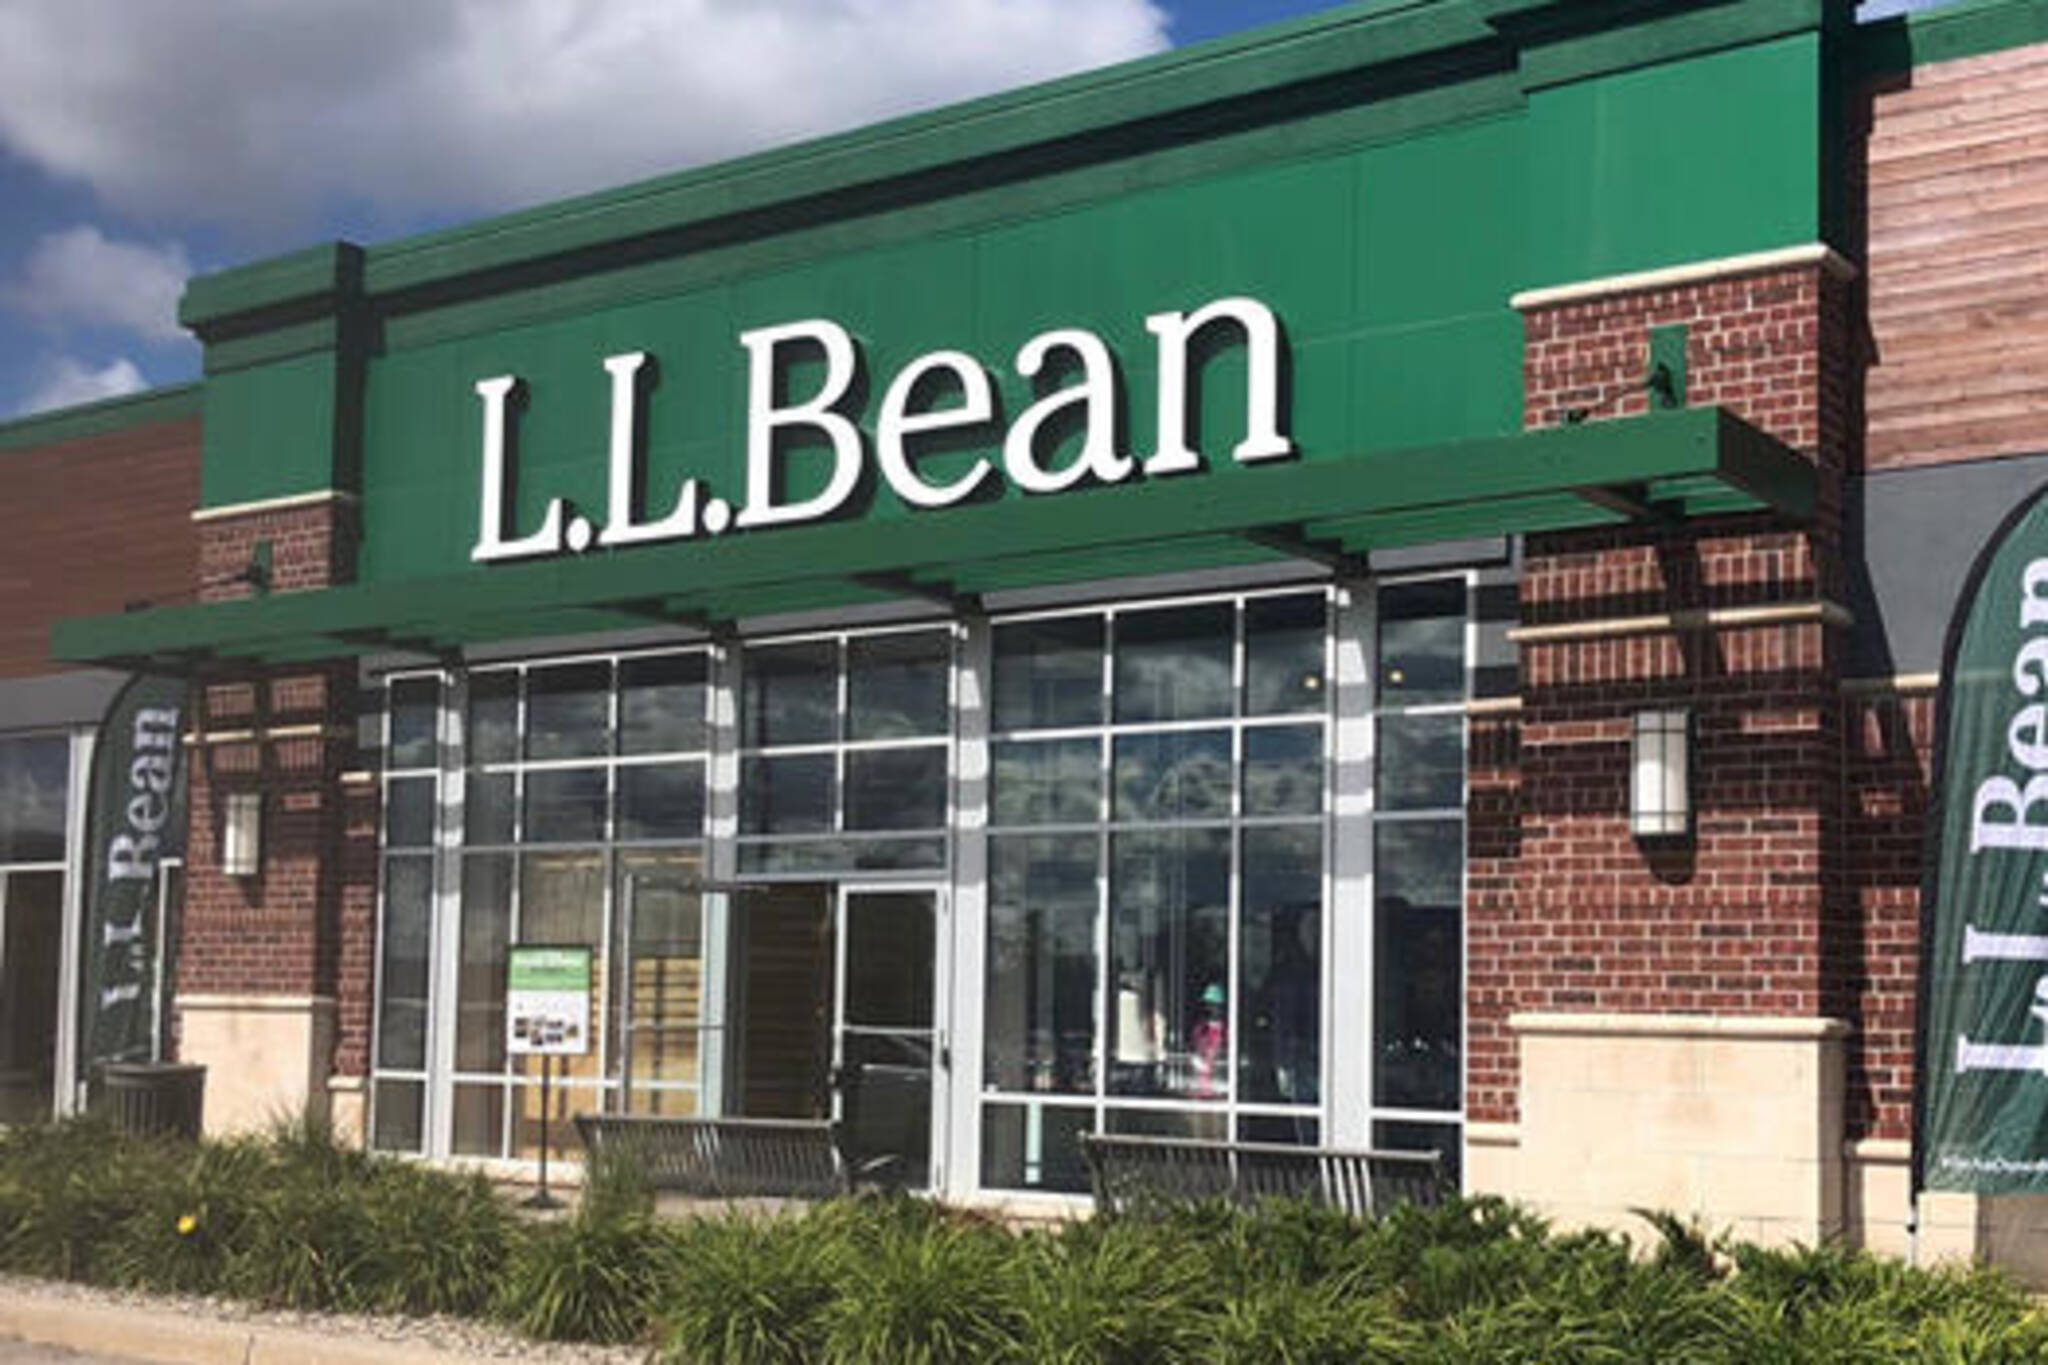 L.L. Bean is opening its first Toronto store later this month